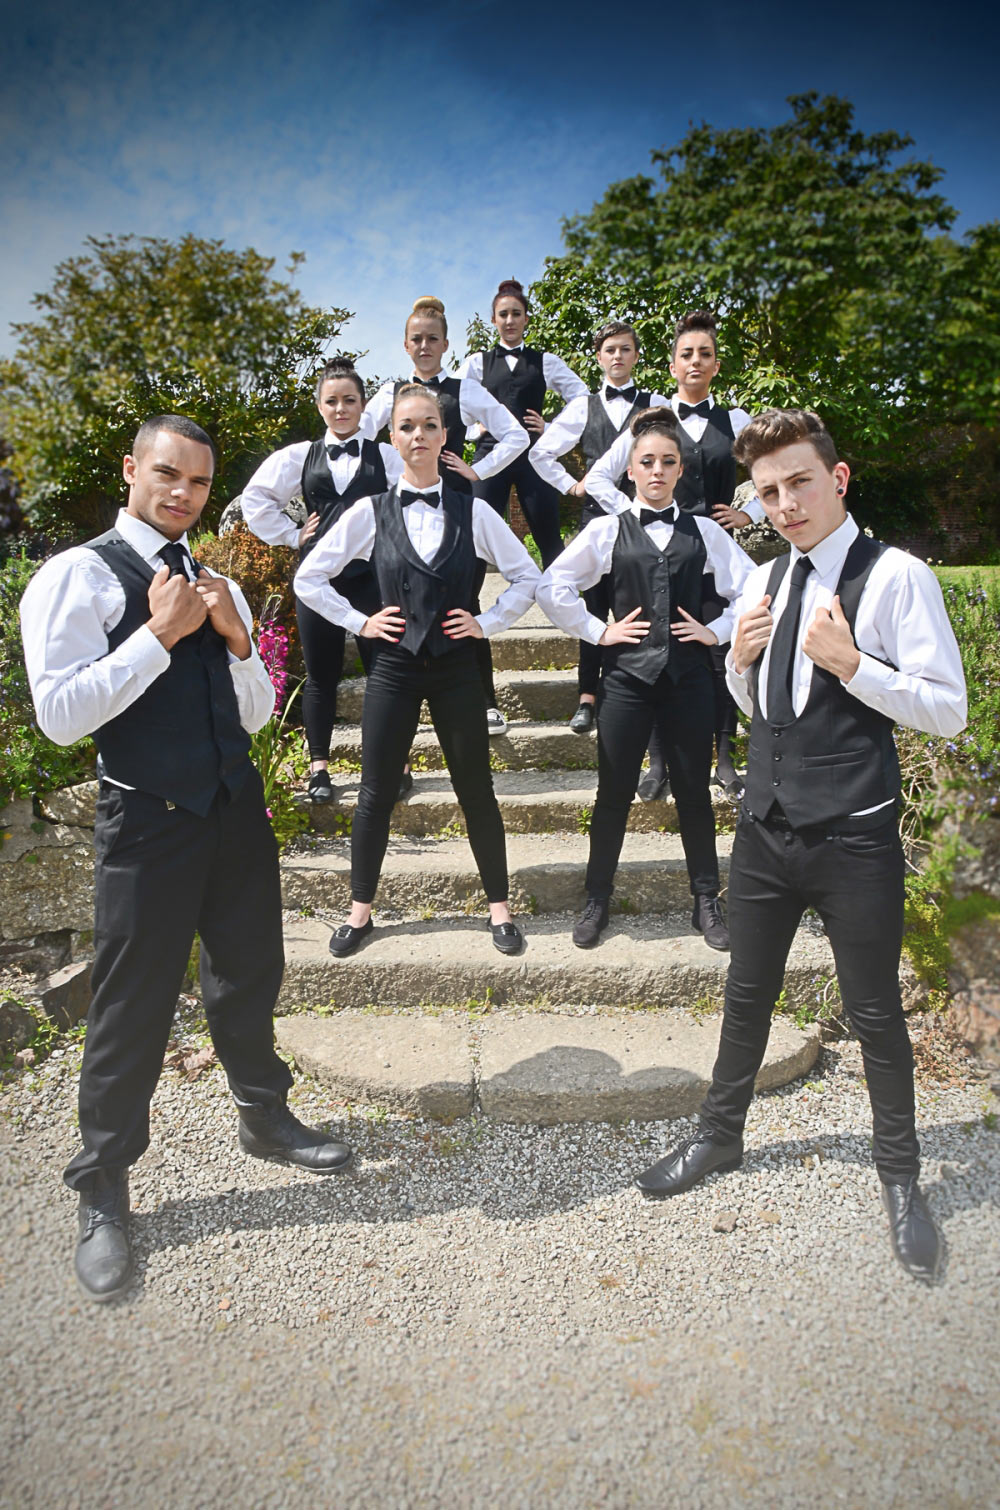 Win a flash-mob package from The Wedding Crashers!